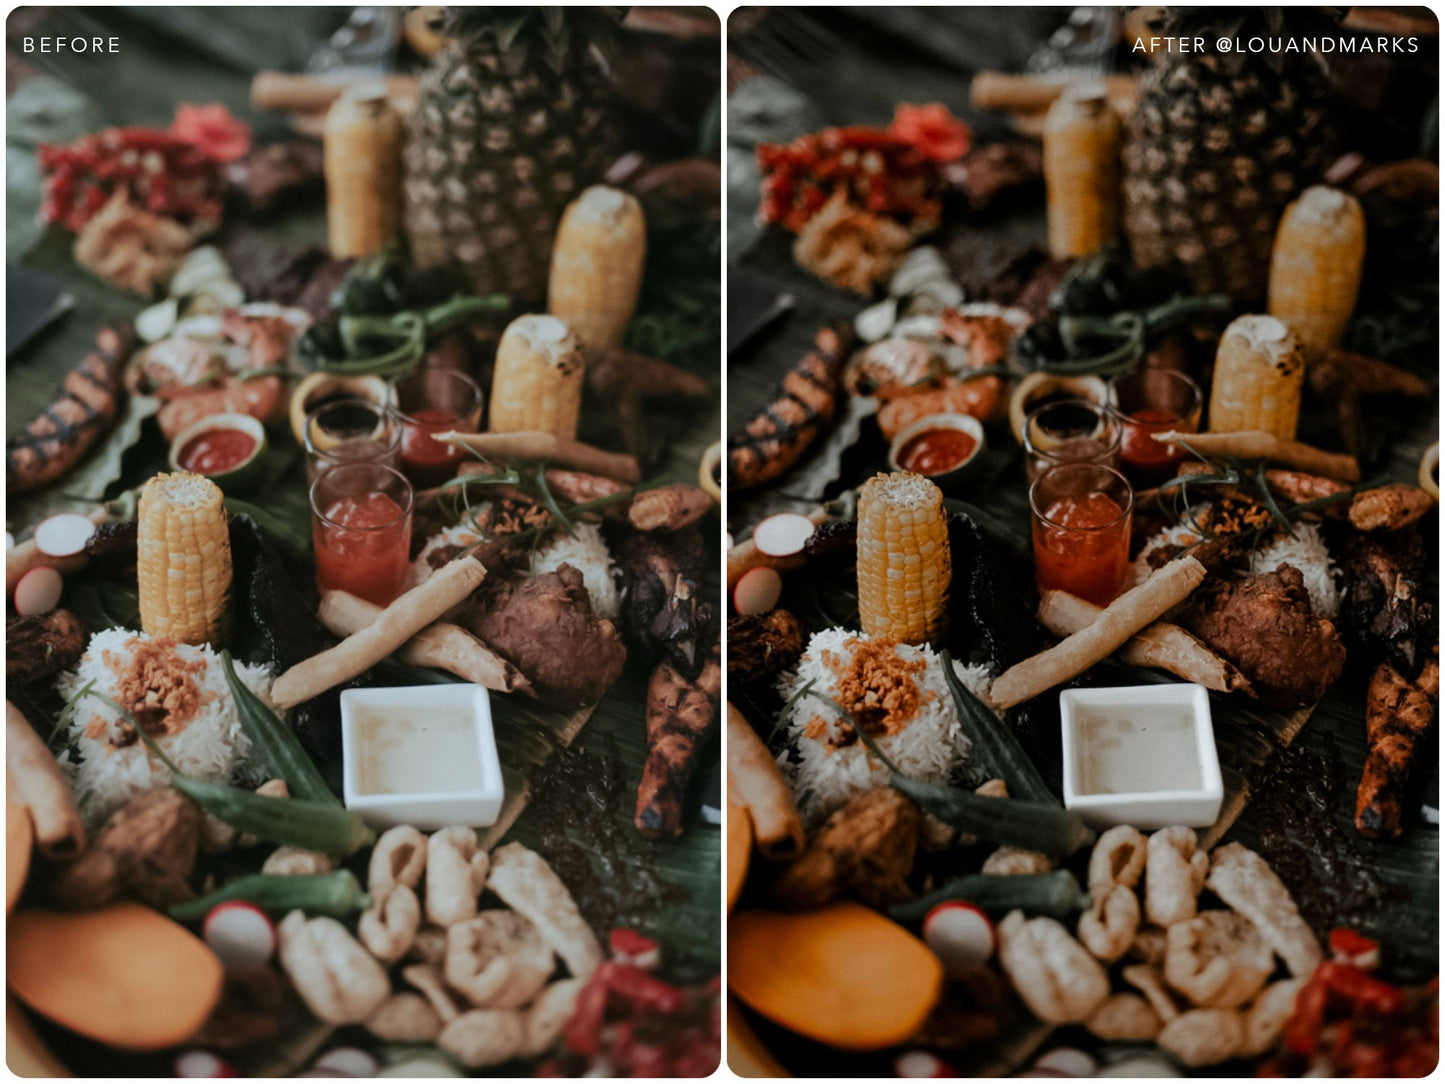 15 Lightroom Mobile Presets for Instagram Lifestyle photo editing, Moody Rich Fall Presets, Instagram Autumn themed Outdoor Desktop Presets